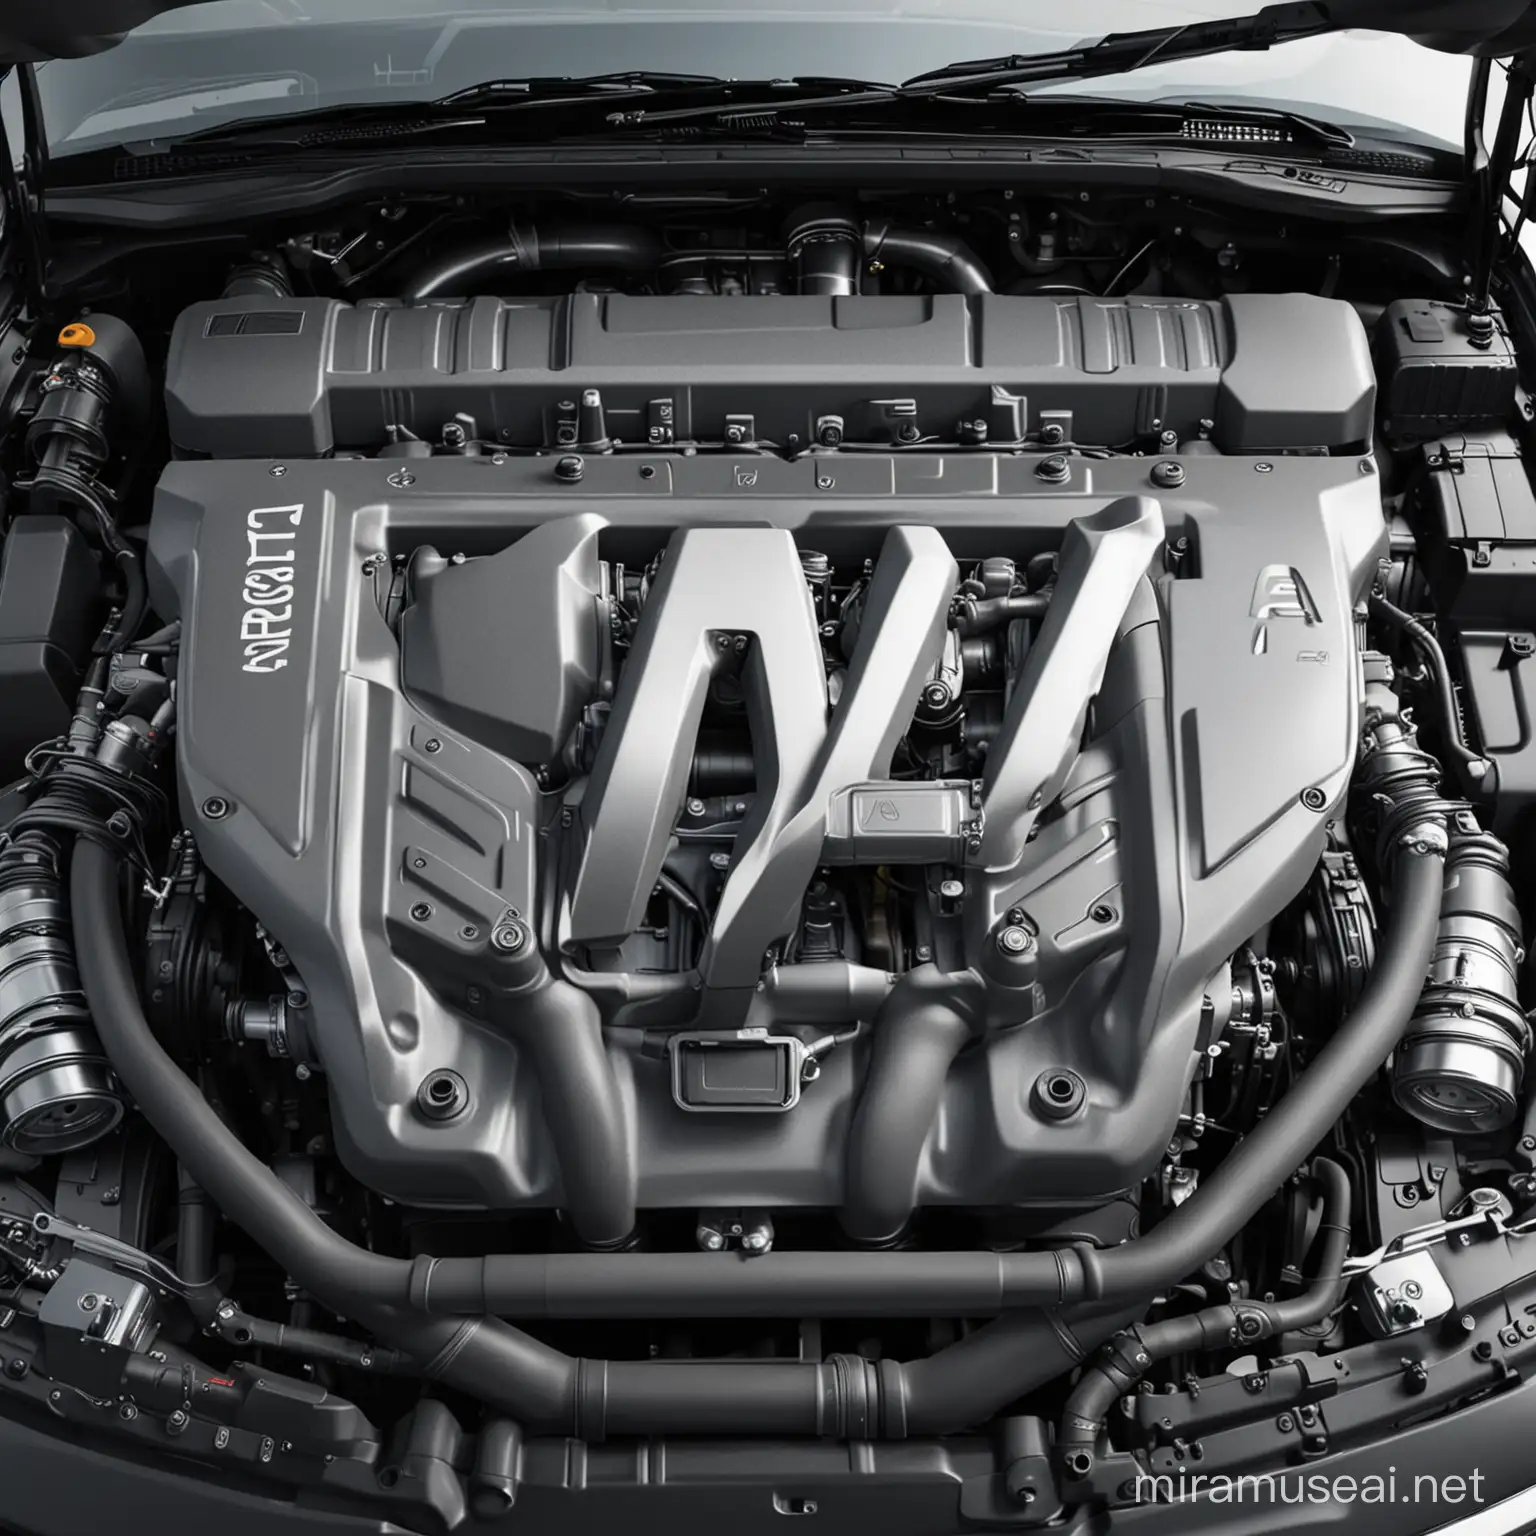 realistic style view of the engine under the hood of the car where the engine cover are folded into a letter A

